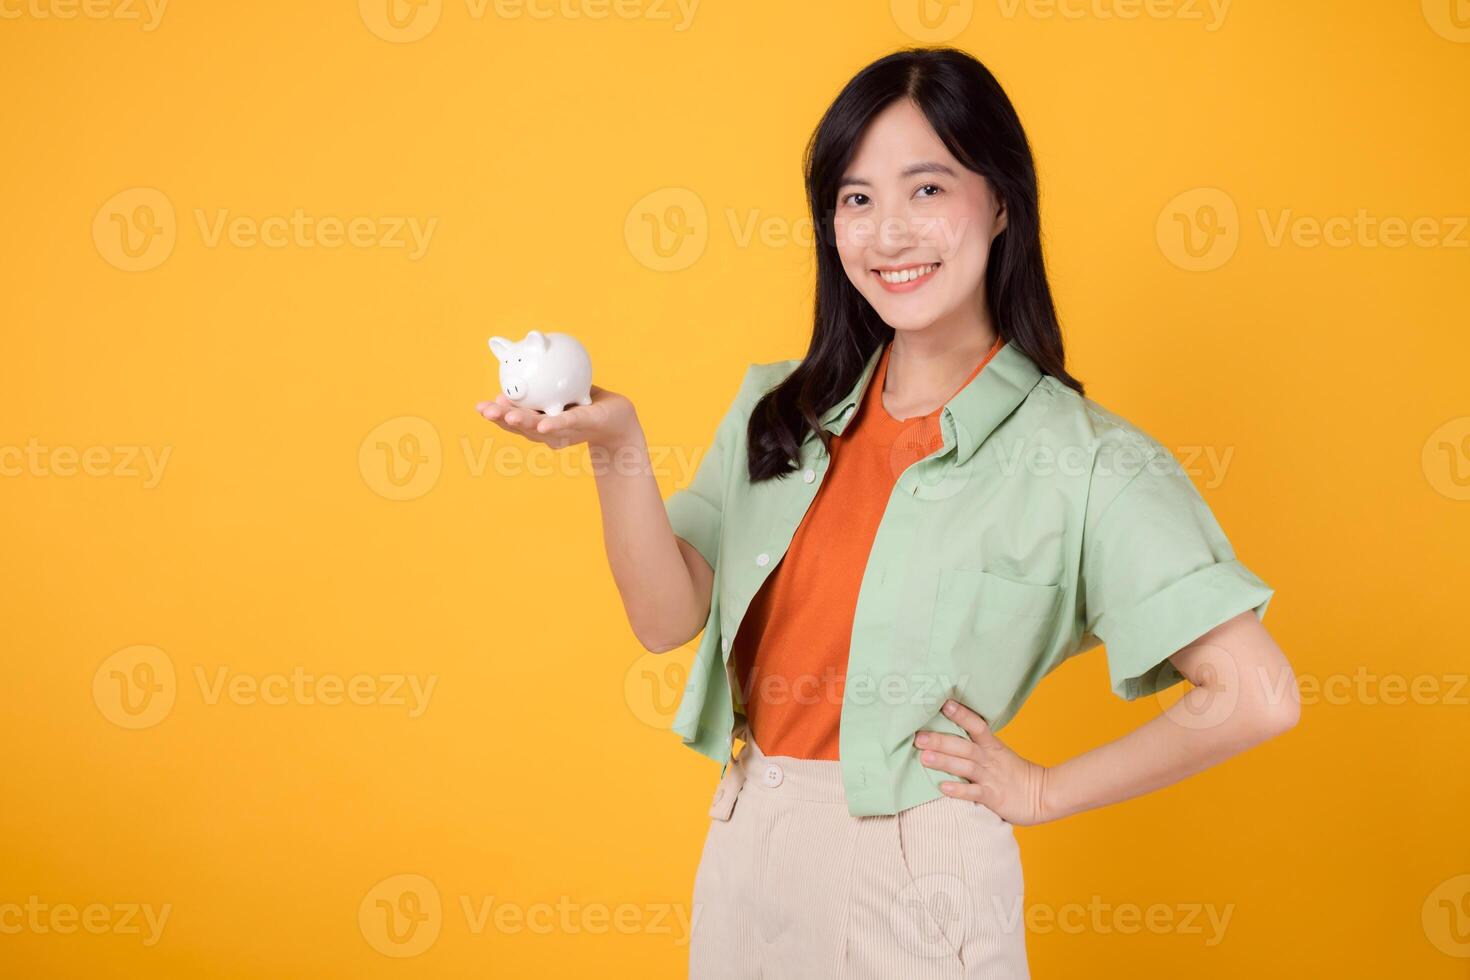 financial money with cheerful young Asian woman in her 30s, donning orange shirt and green jumper, displaying piggy bank while striking akimbo gesture on yellow background. Financial money concept. photo